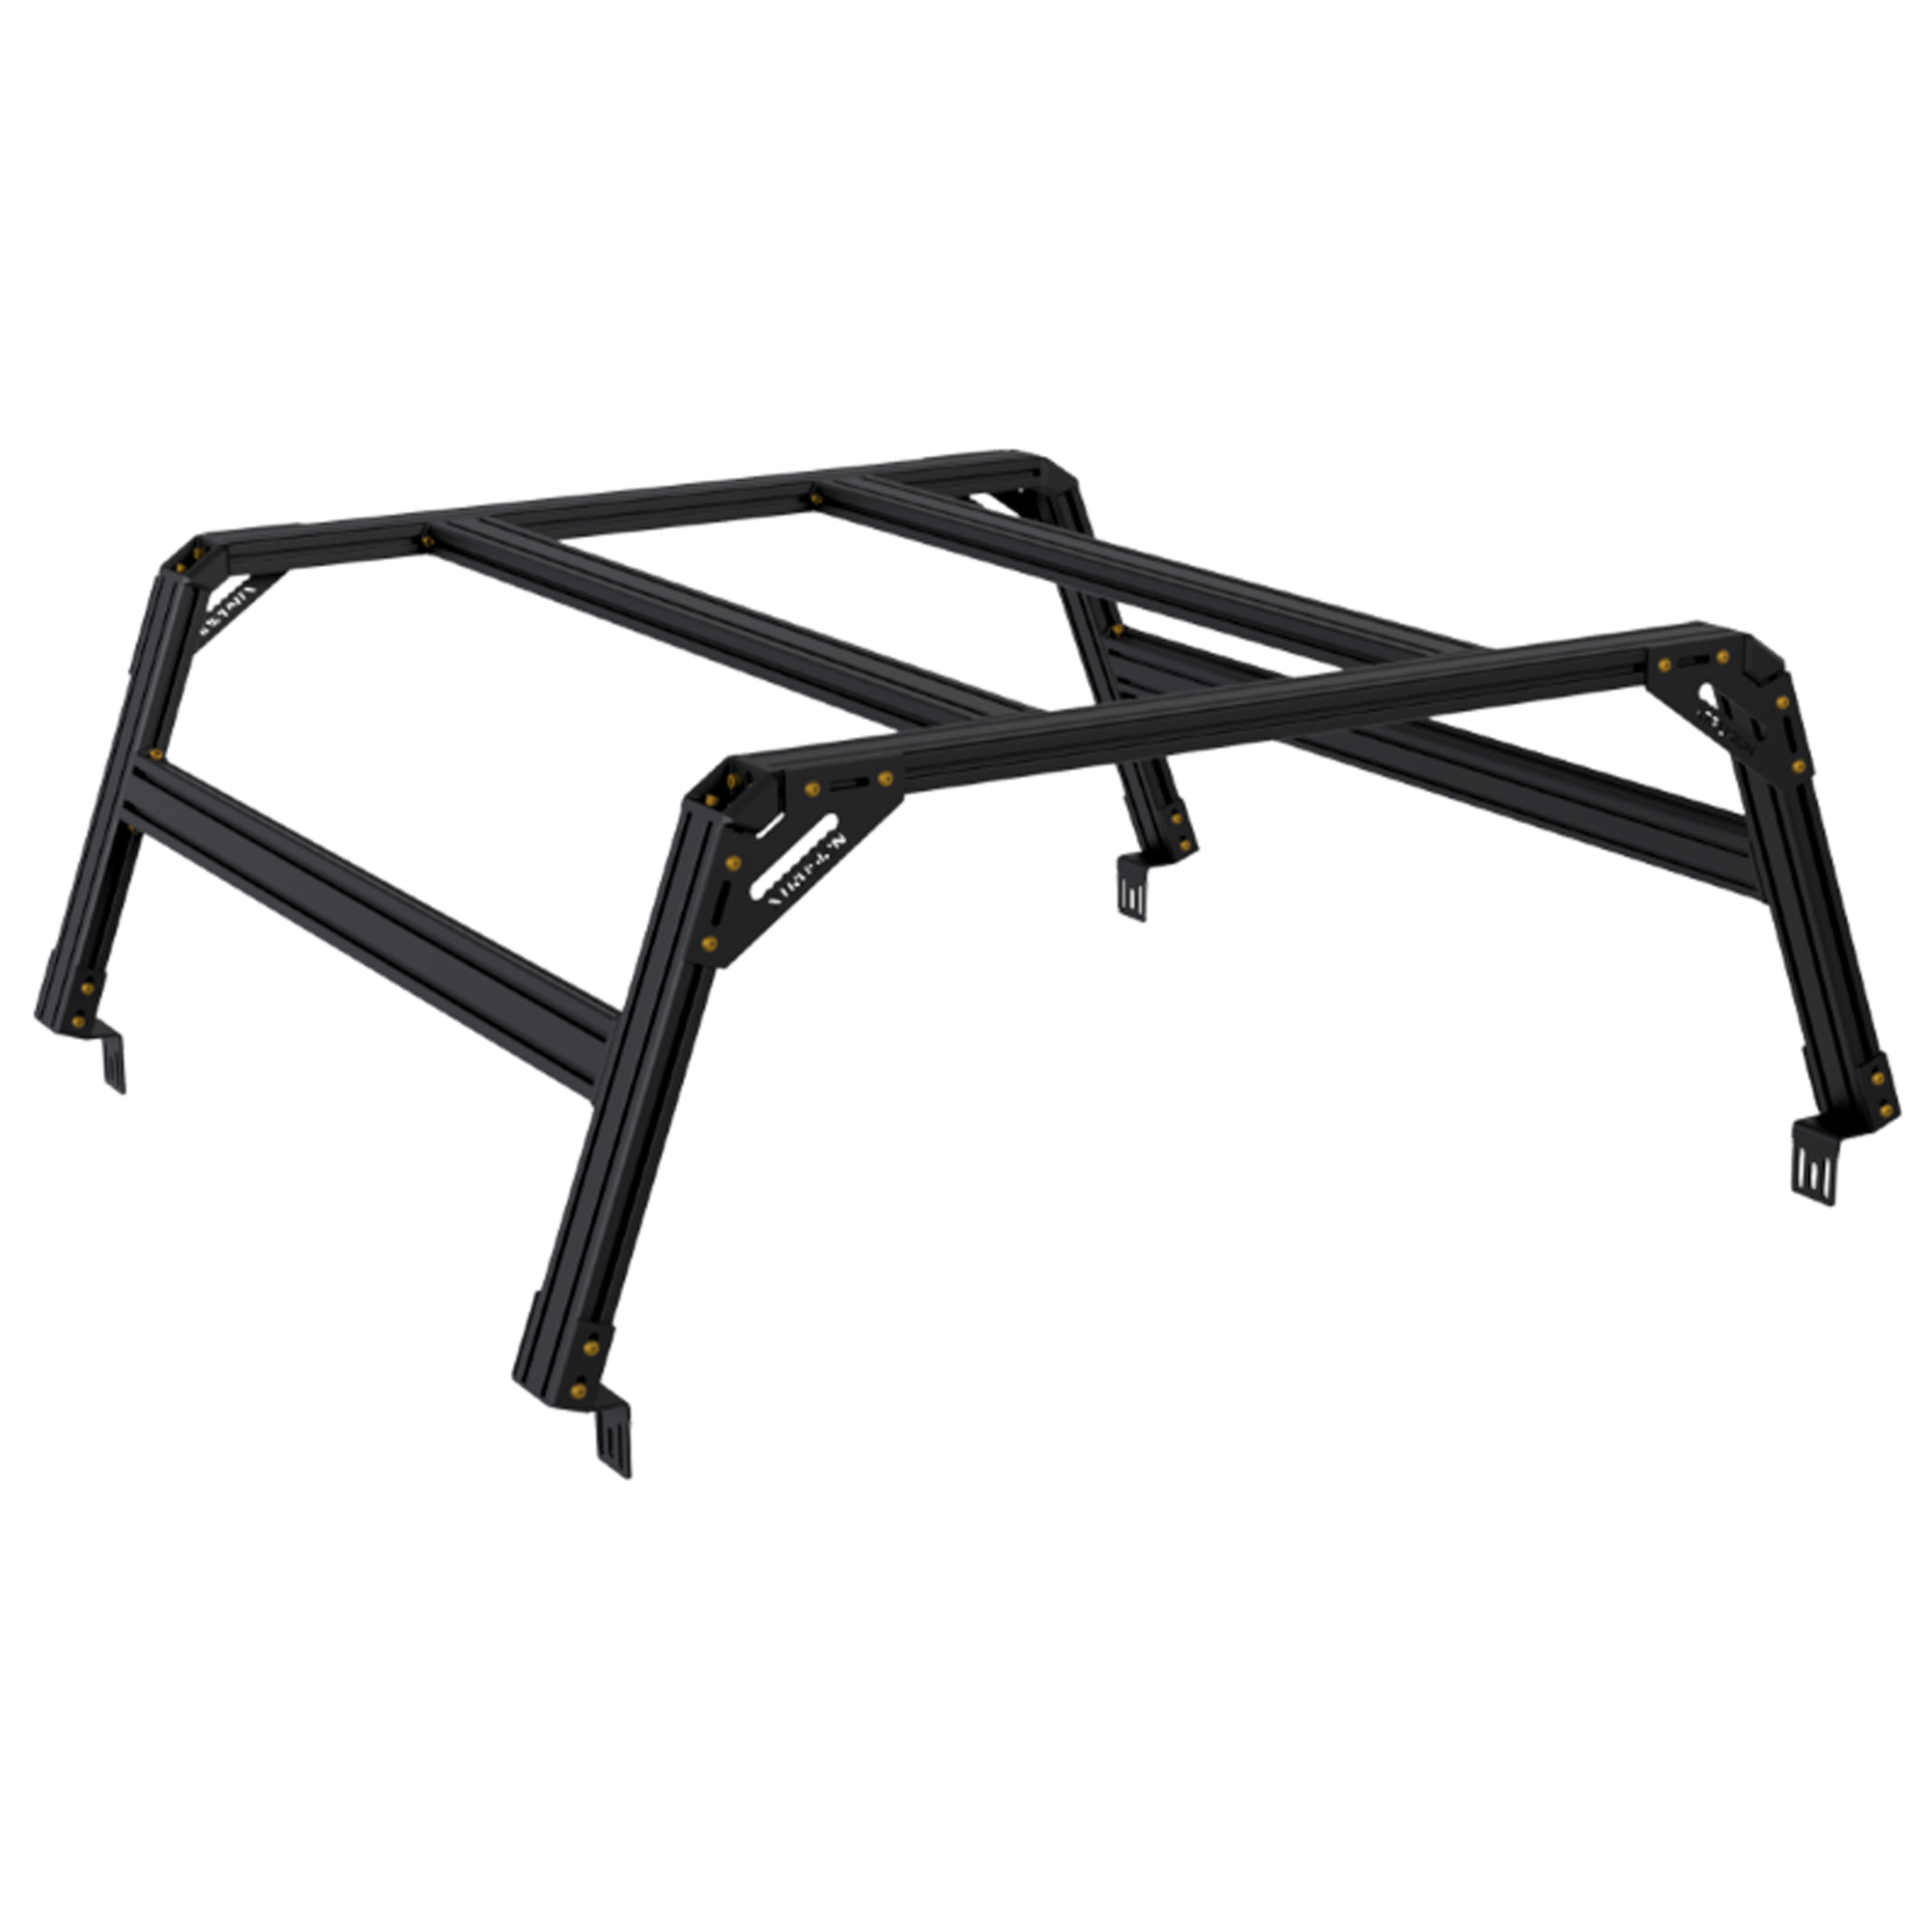 XTR1 Build-Your-Own Bed Rack - Dodge Ram 1500 Straight Bed